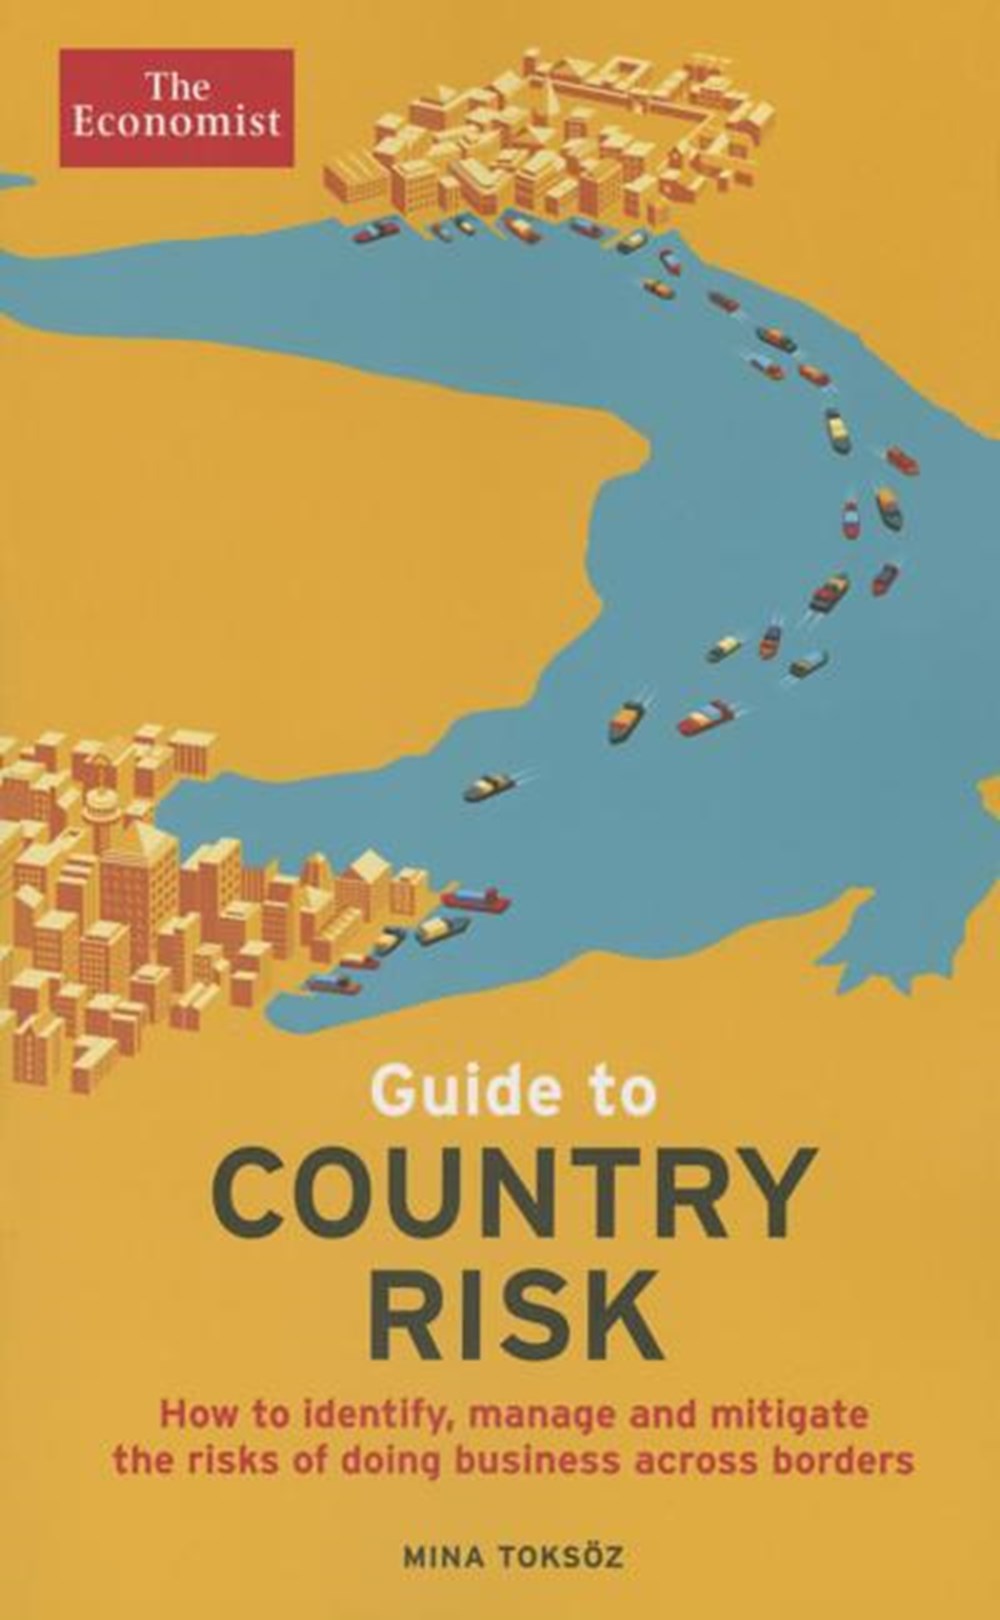 Guide to Country Risk: How to Identify, Manage and Mitigate the Risks of Doing Business Across Borde